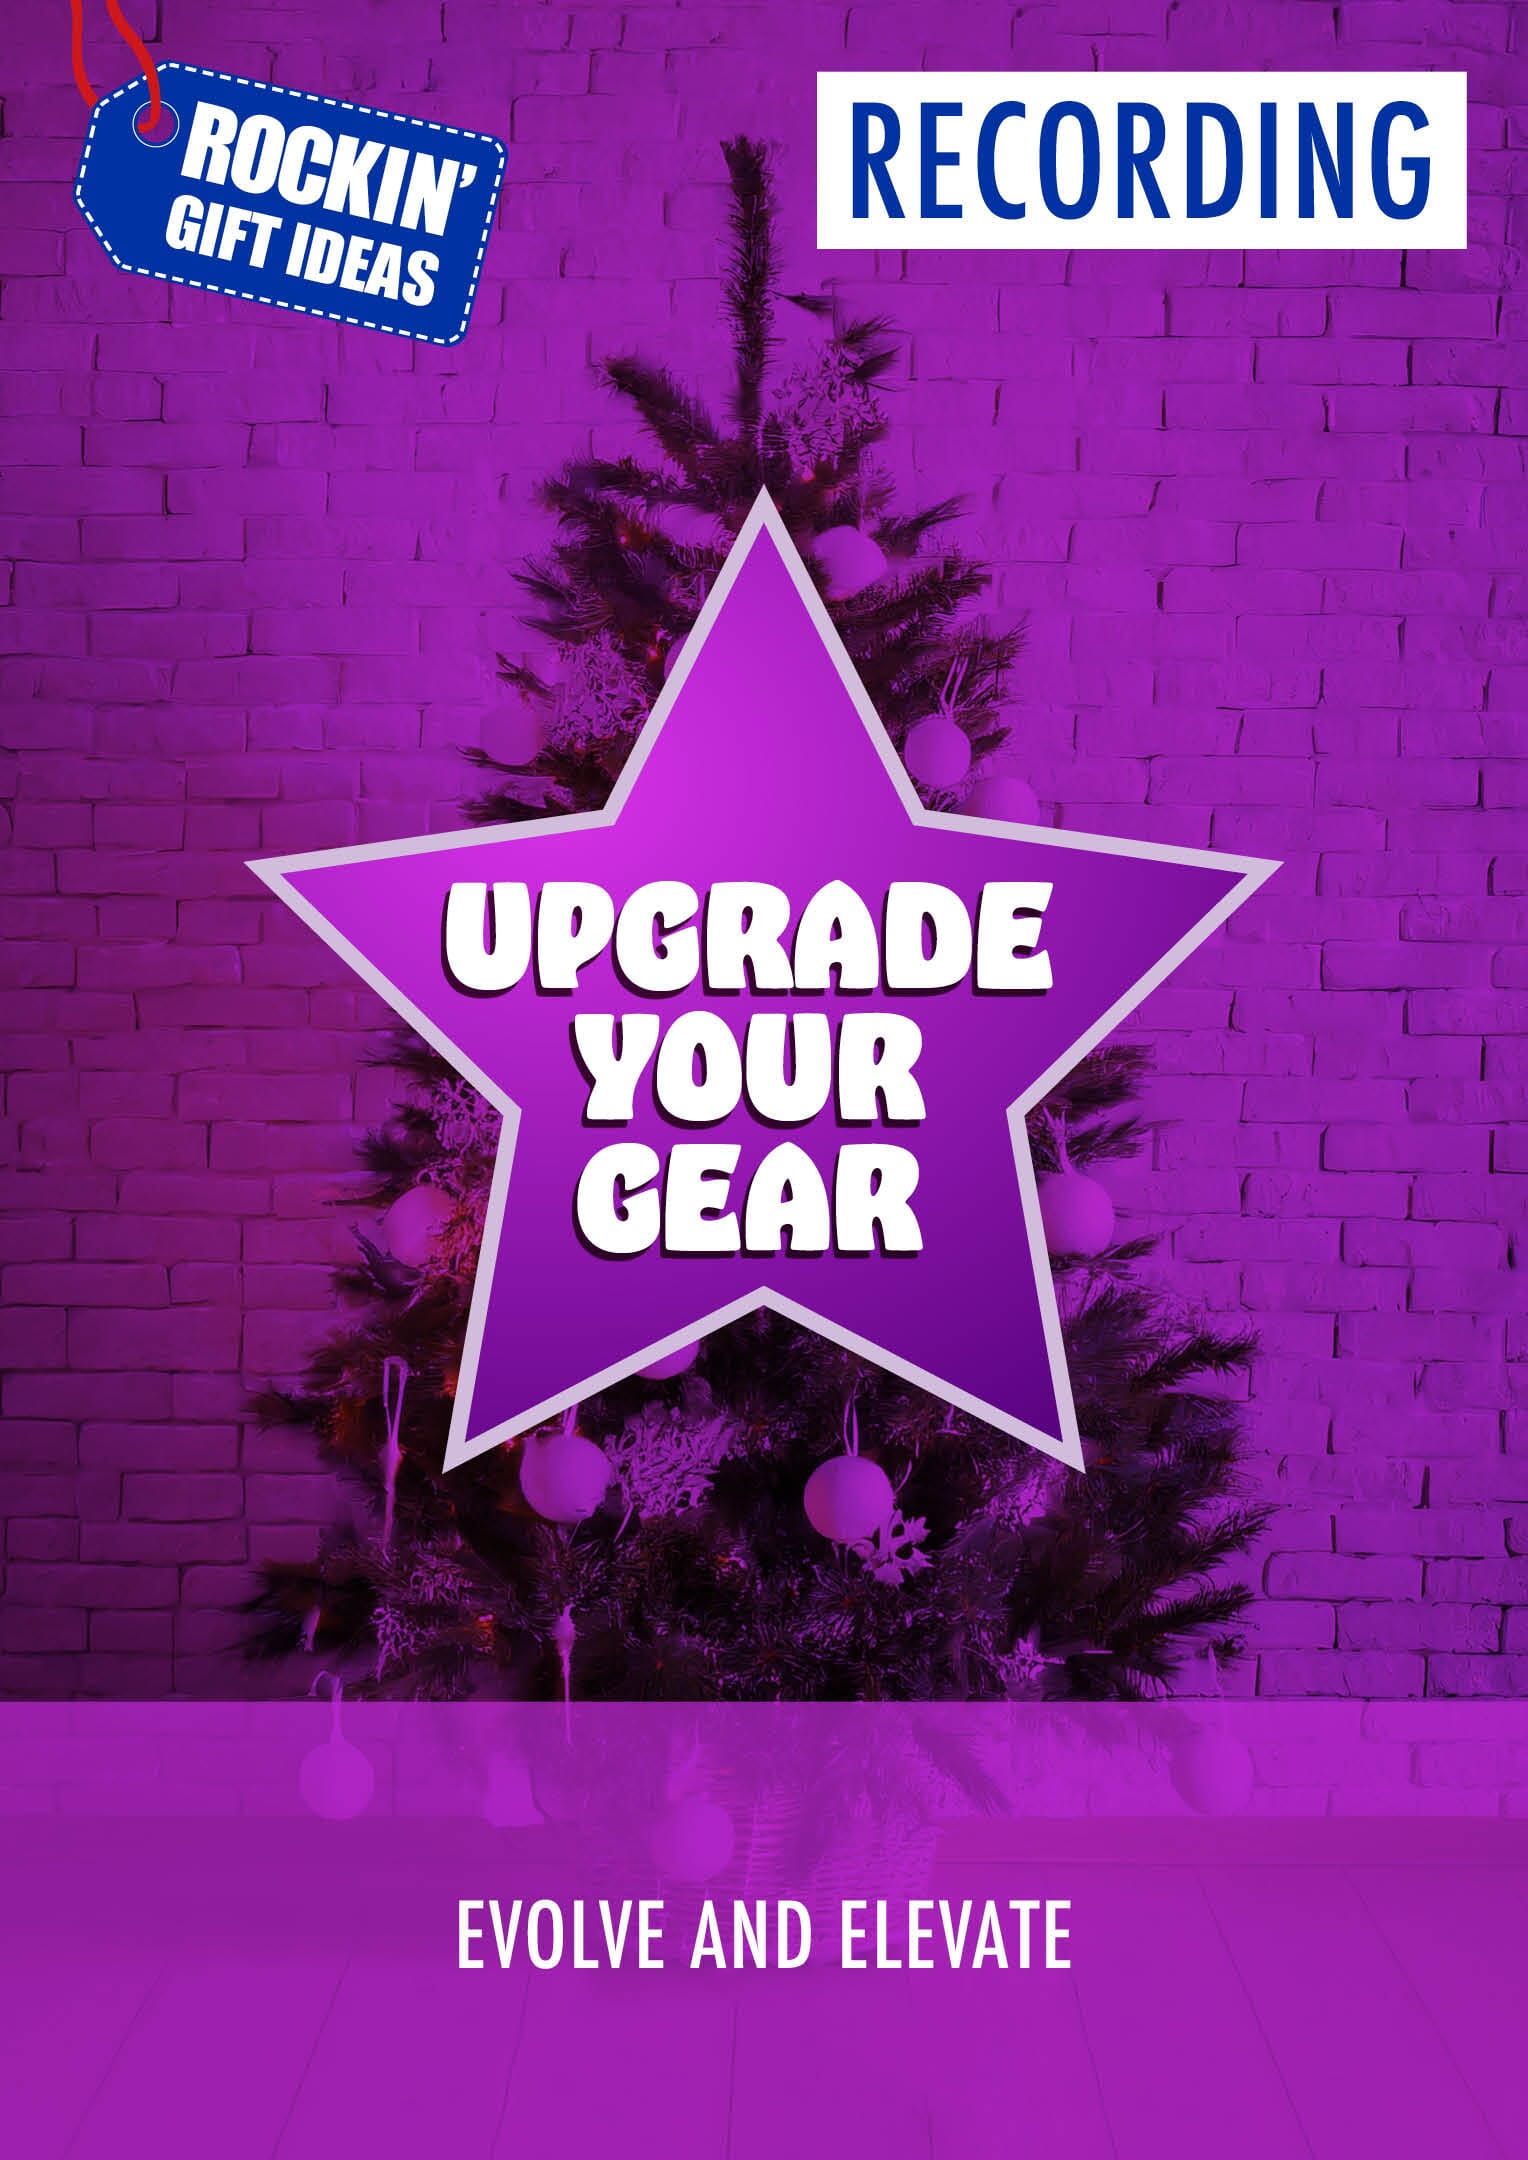 Rockin' Gift Ideas 2023 - Upgrade Your Recording Gear